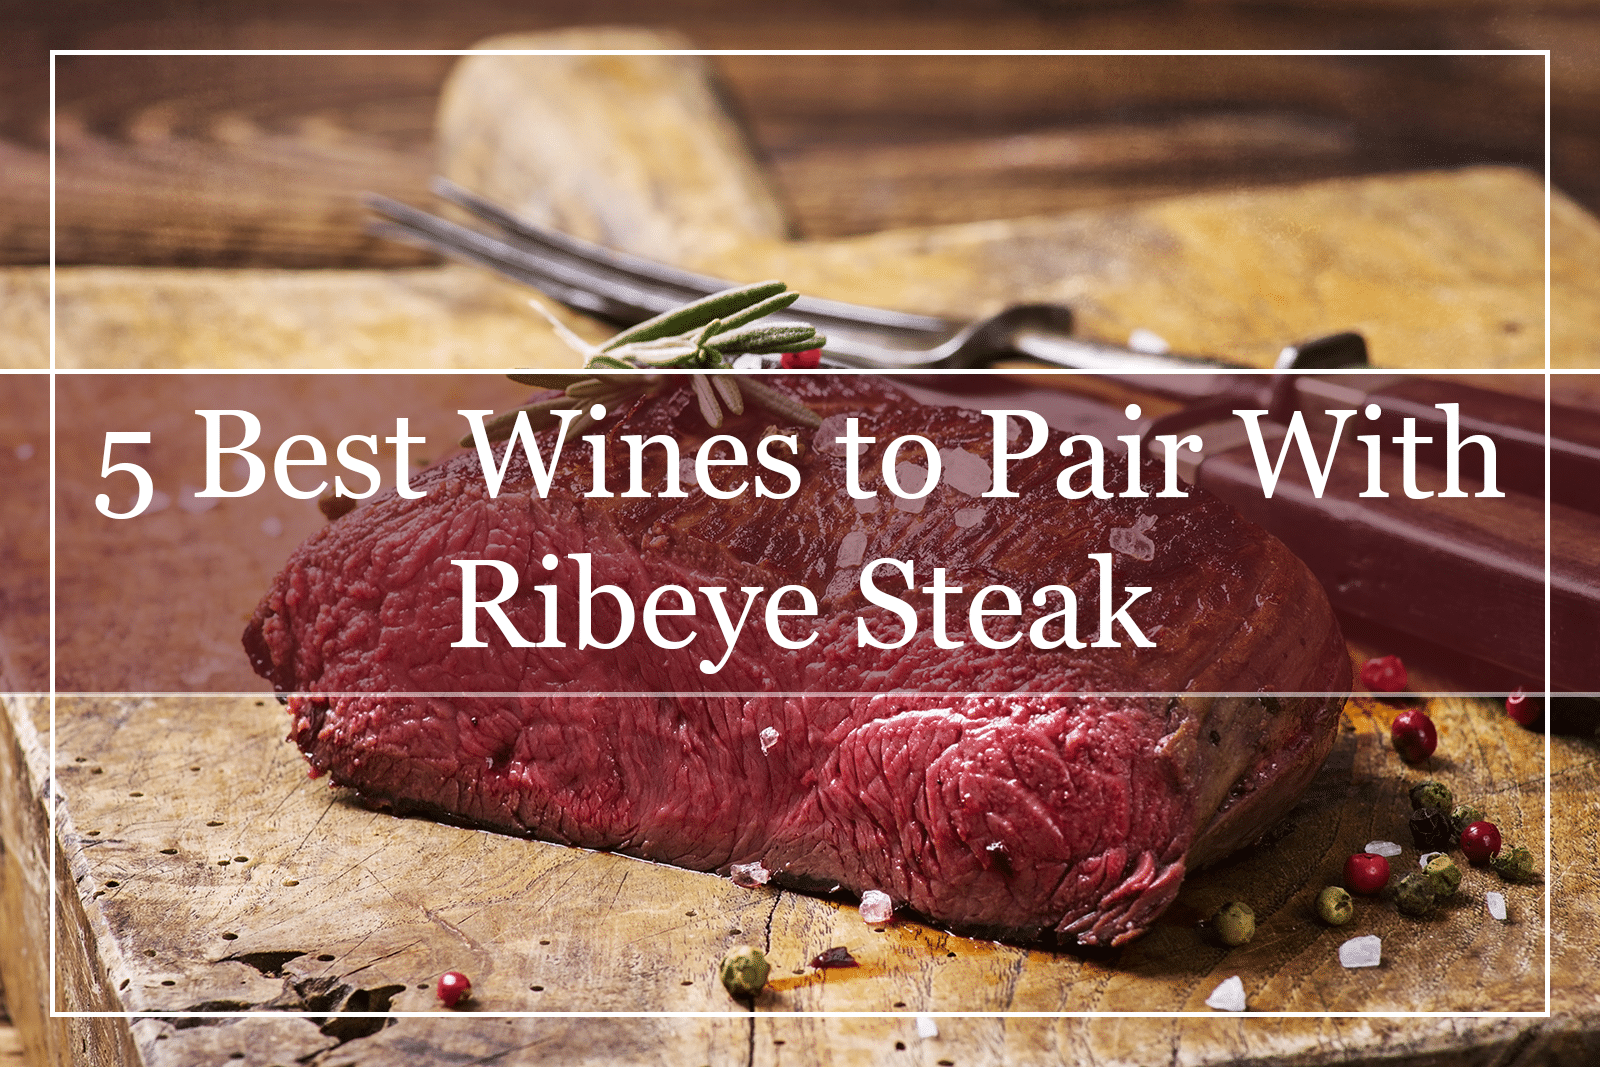 5 Best Wines to Pair With Ribeye Steak Featured